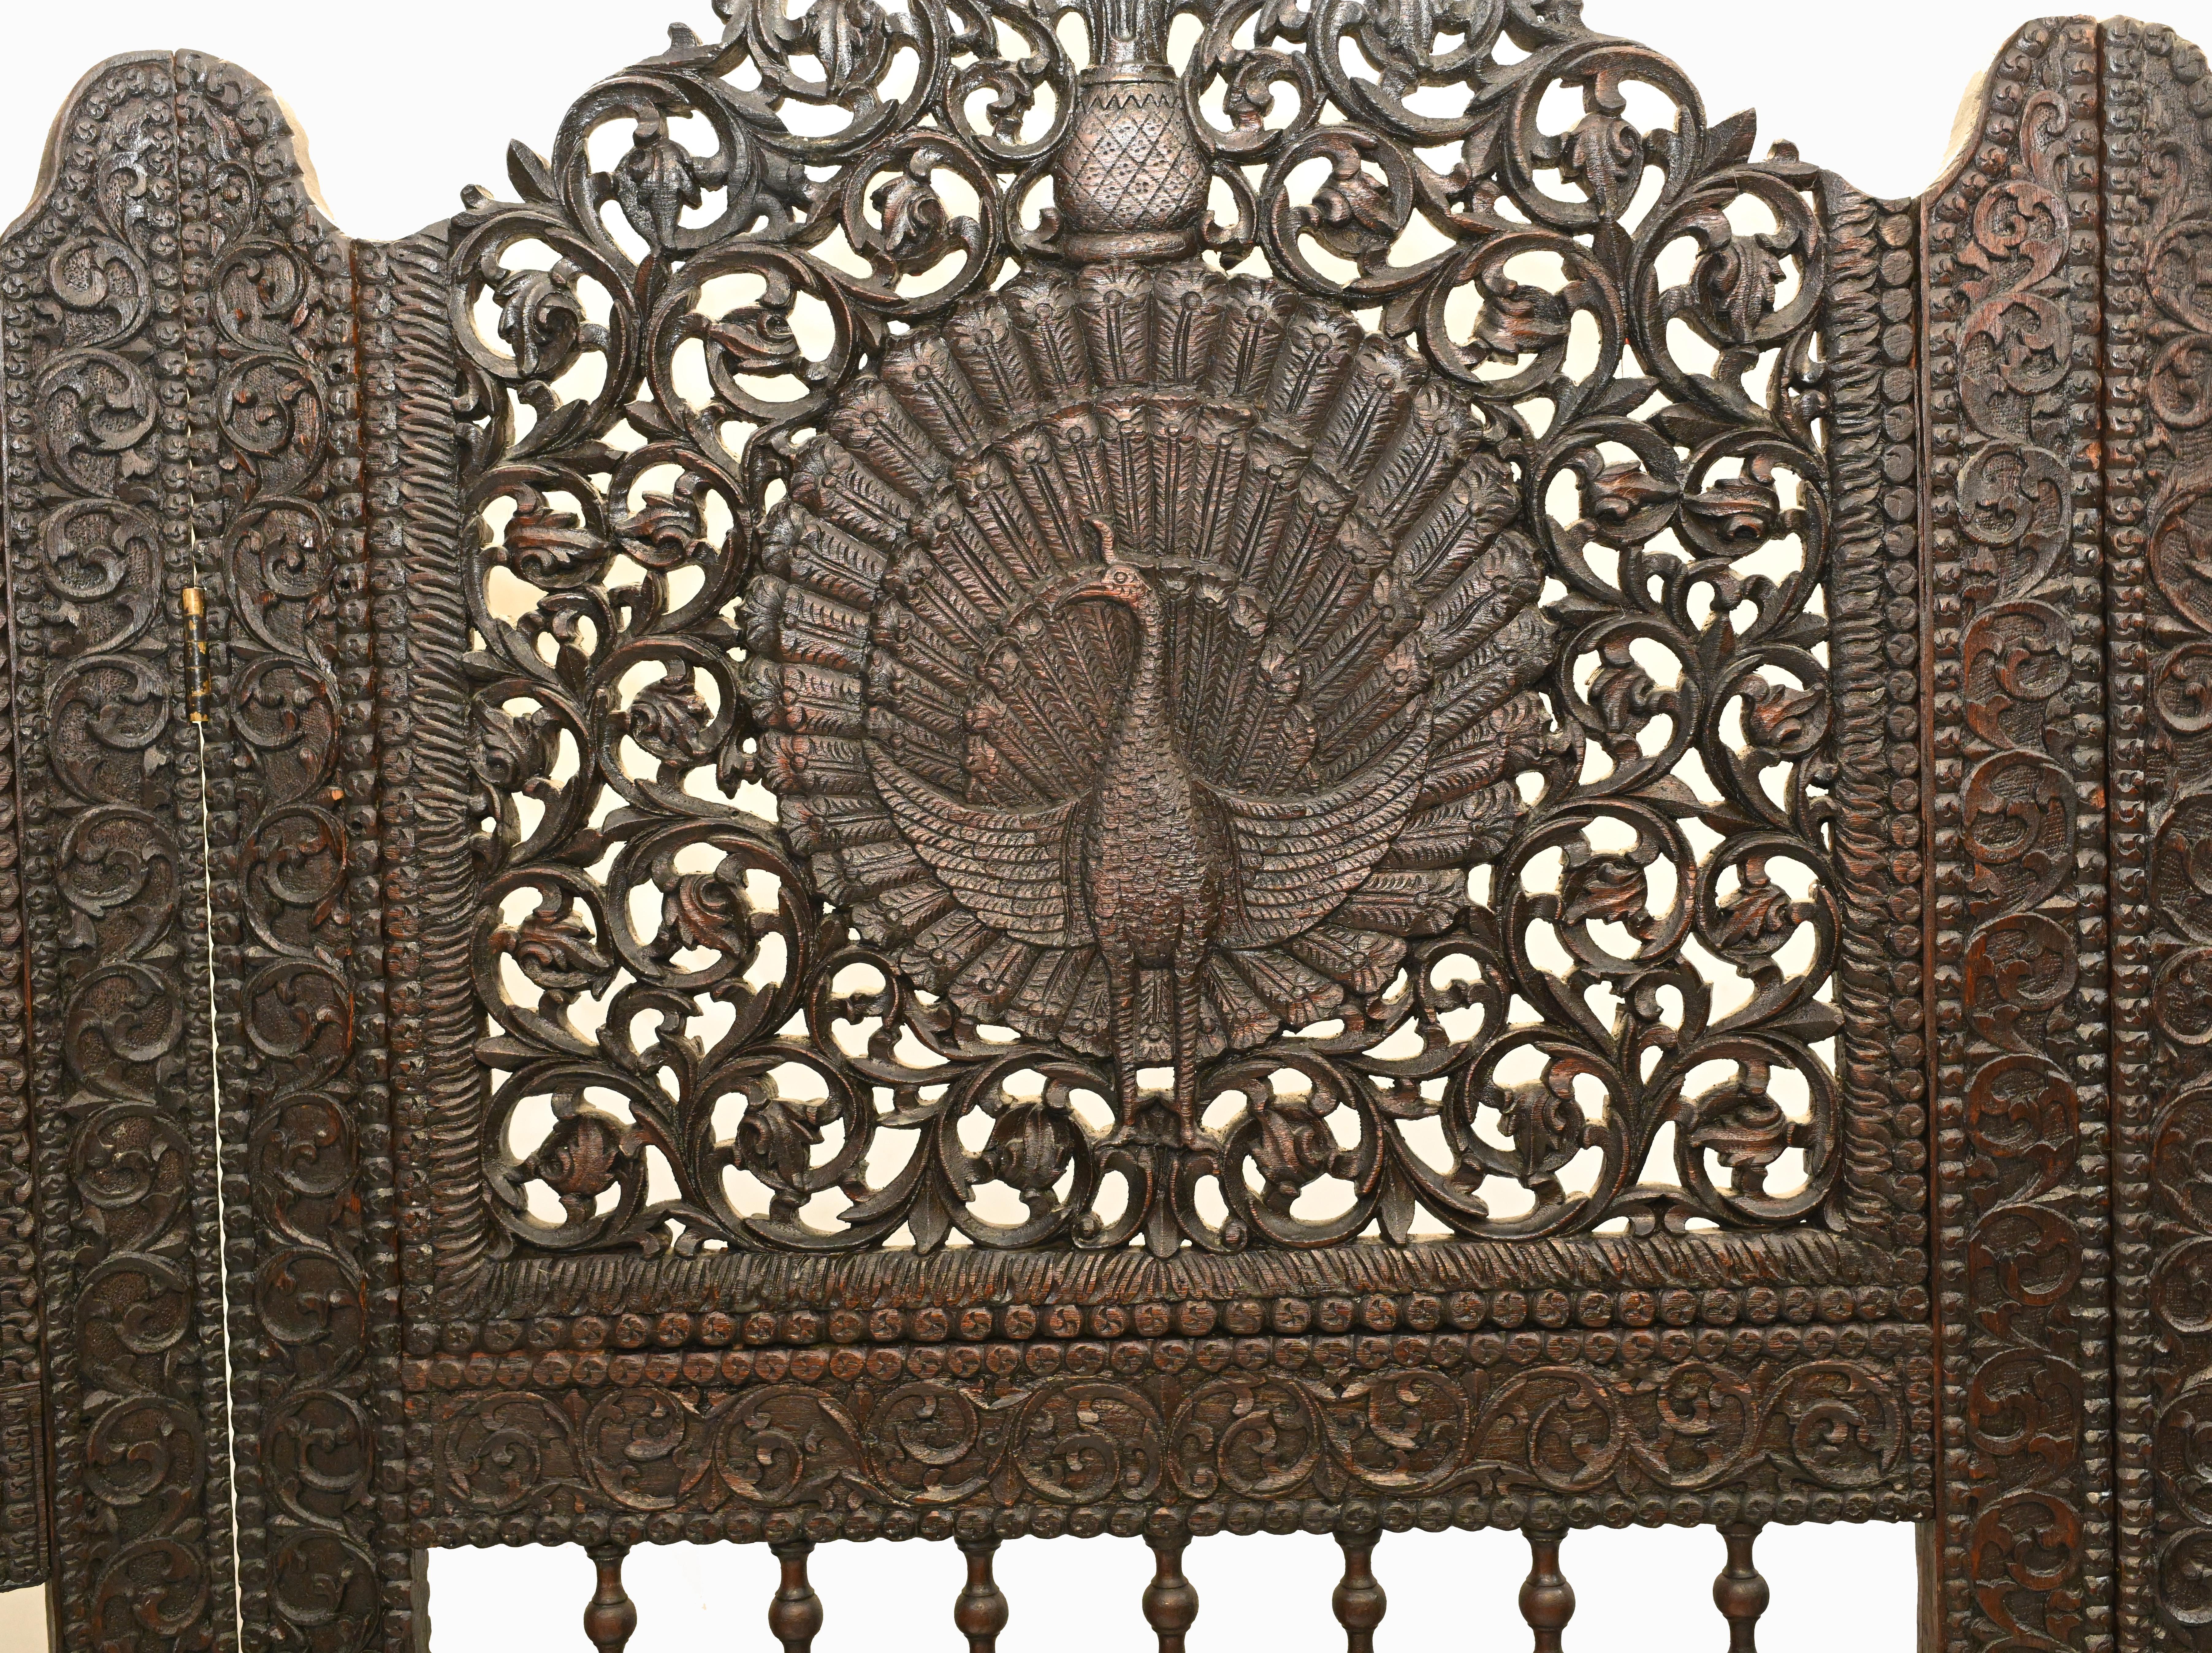 Hats off to our buying department for securing this work of art
We are proud to present this antique five panel Burmese screen
Just look at the carving to this piece, a real feat of craftsmanship
Features profusely carved figurines and